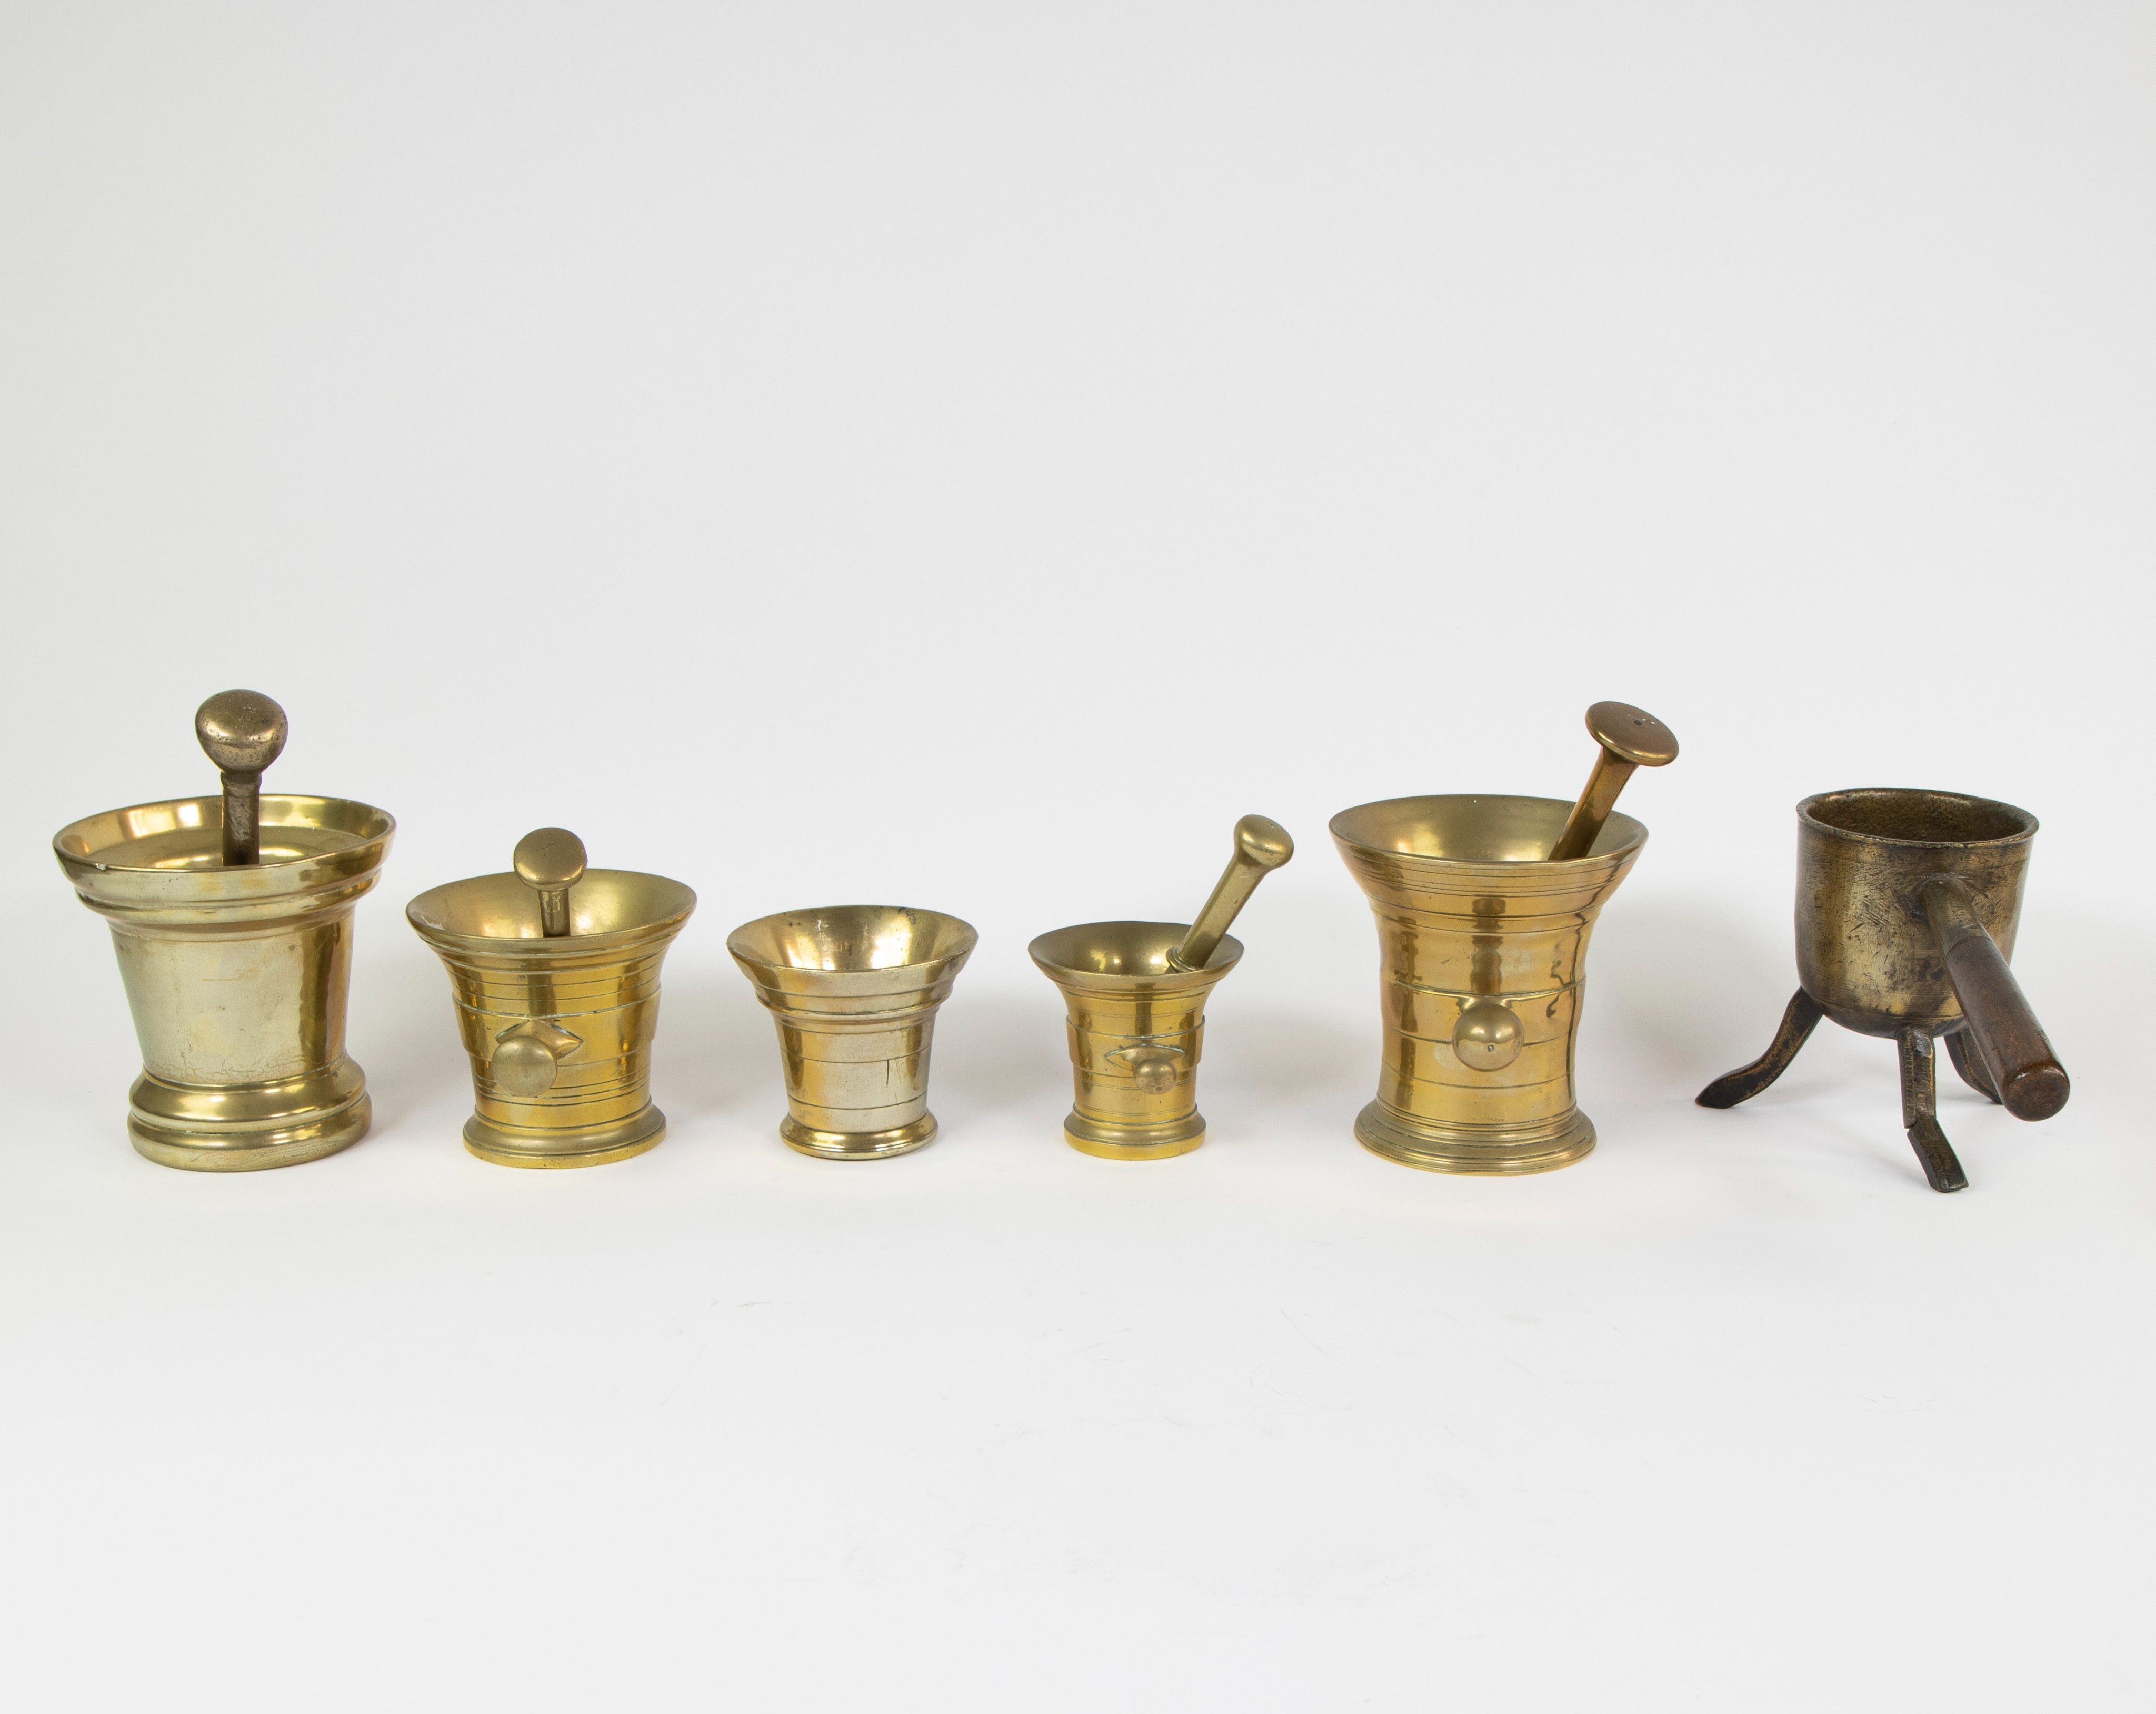 Collection of mortars, pestles and a melting pot - Image 2 of 6